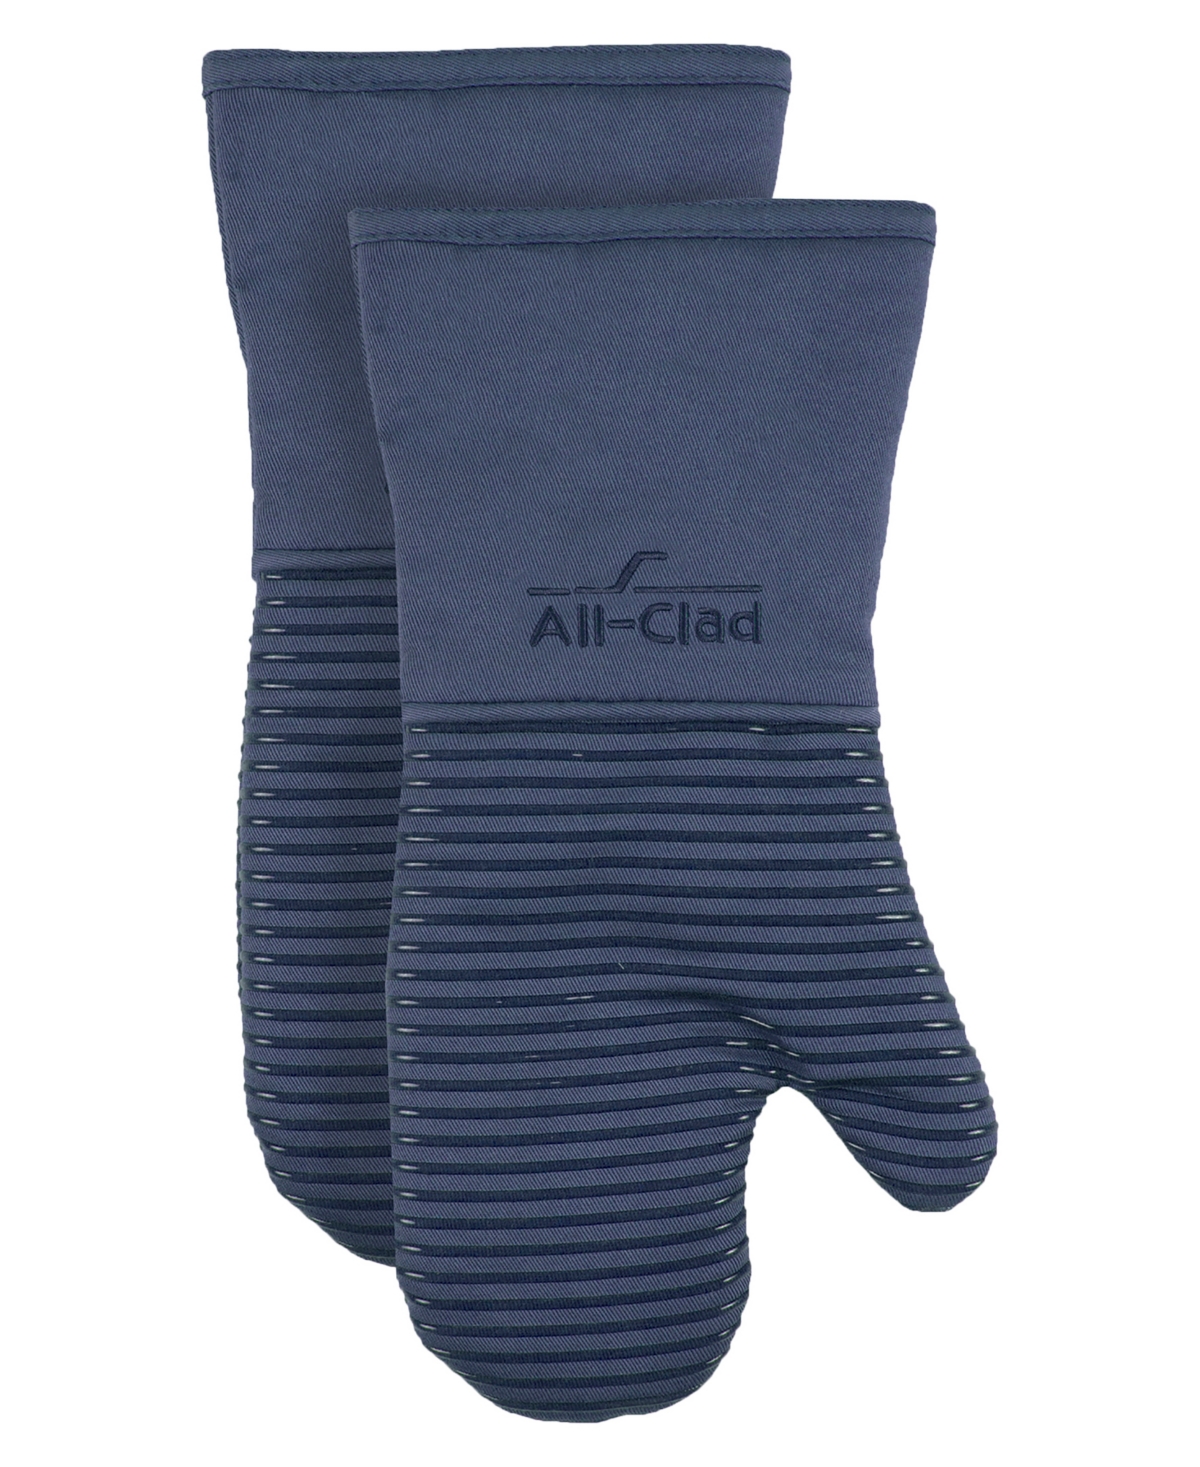 All-clad Ribbed Silicone Cotton Twill Oven Mitt, Set Of 2 In Blue